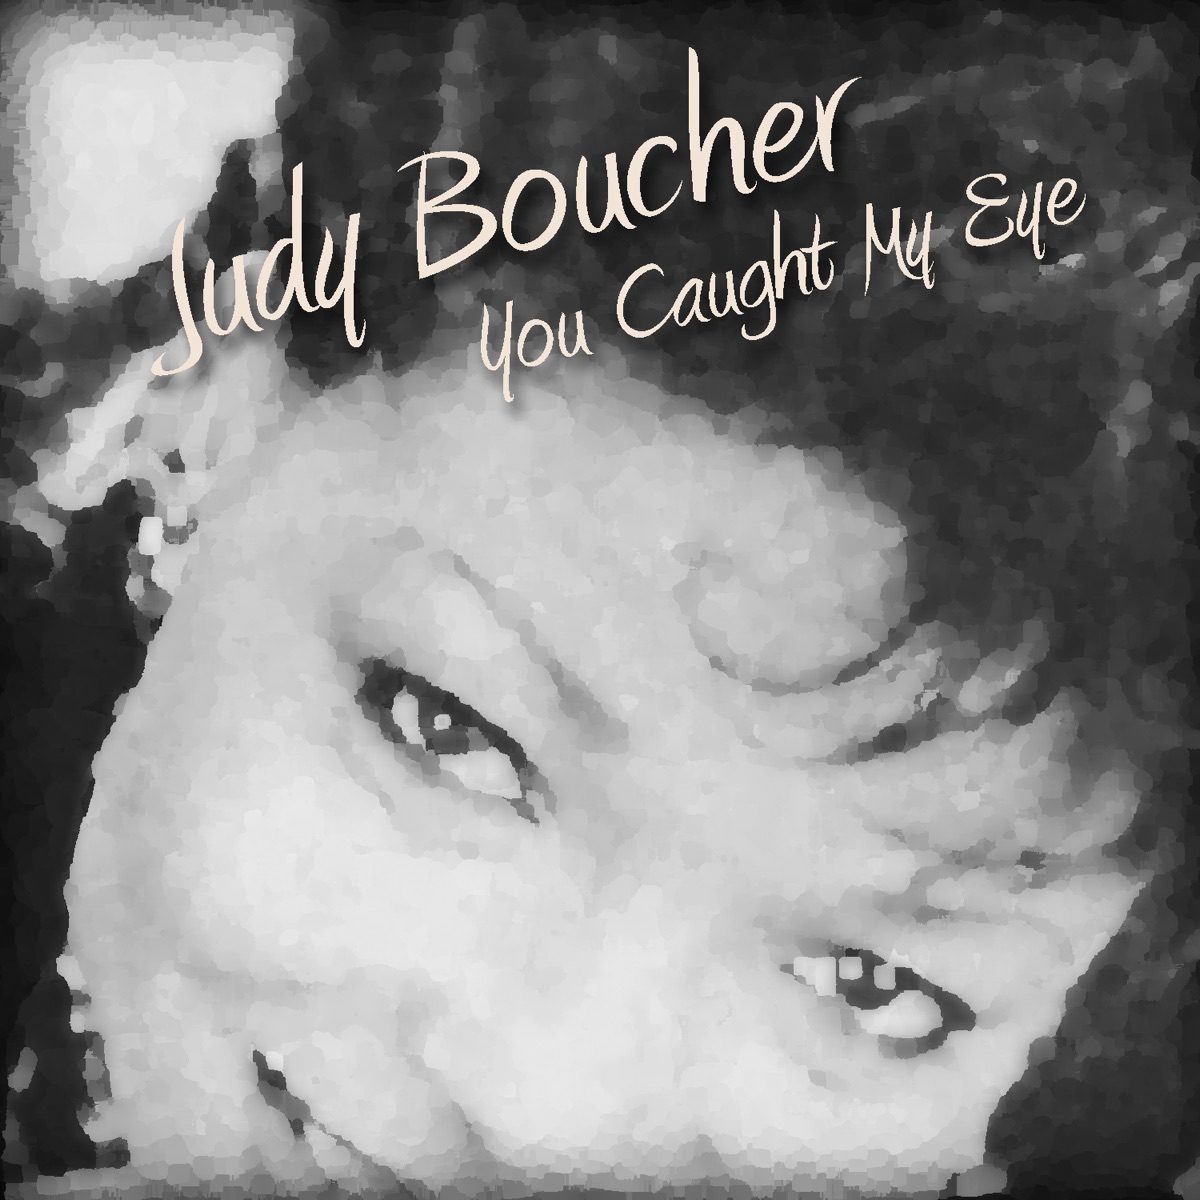 You Caught My Eye by Judy Boucher on Apple Music